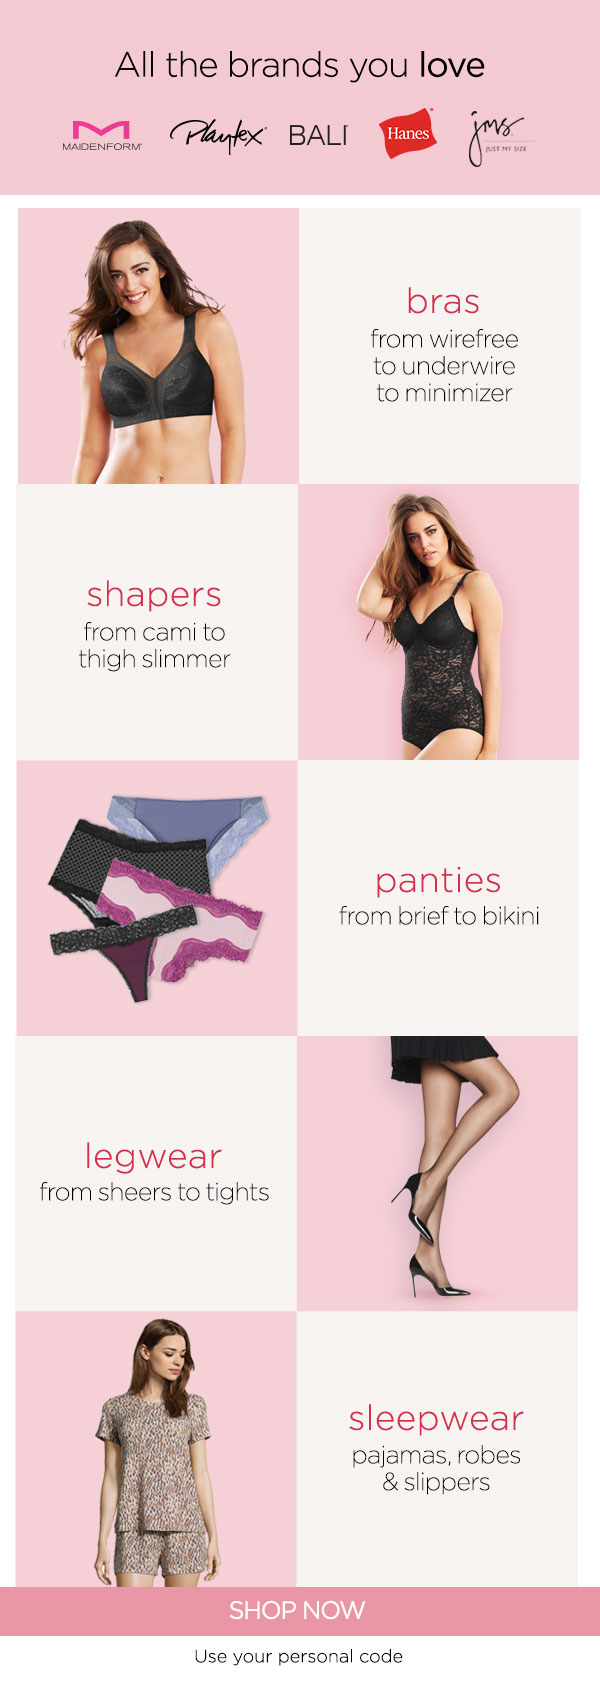 All the brands you love DA, Pl AL B 6% bras from wirefree to underwire to minimizer shapers from cami to thigh slimmer panties from brief to bikini legwear from sheers to tights sleepwear pajamas, robes slippers SHOP NOW Use your personal code 